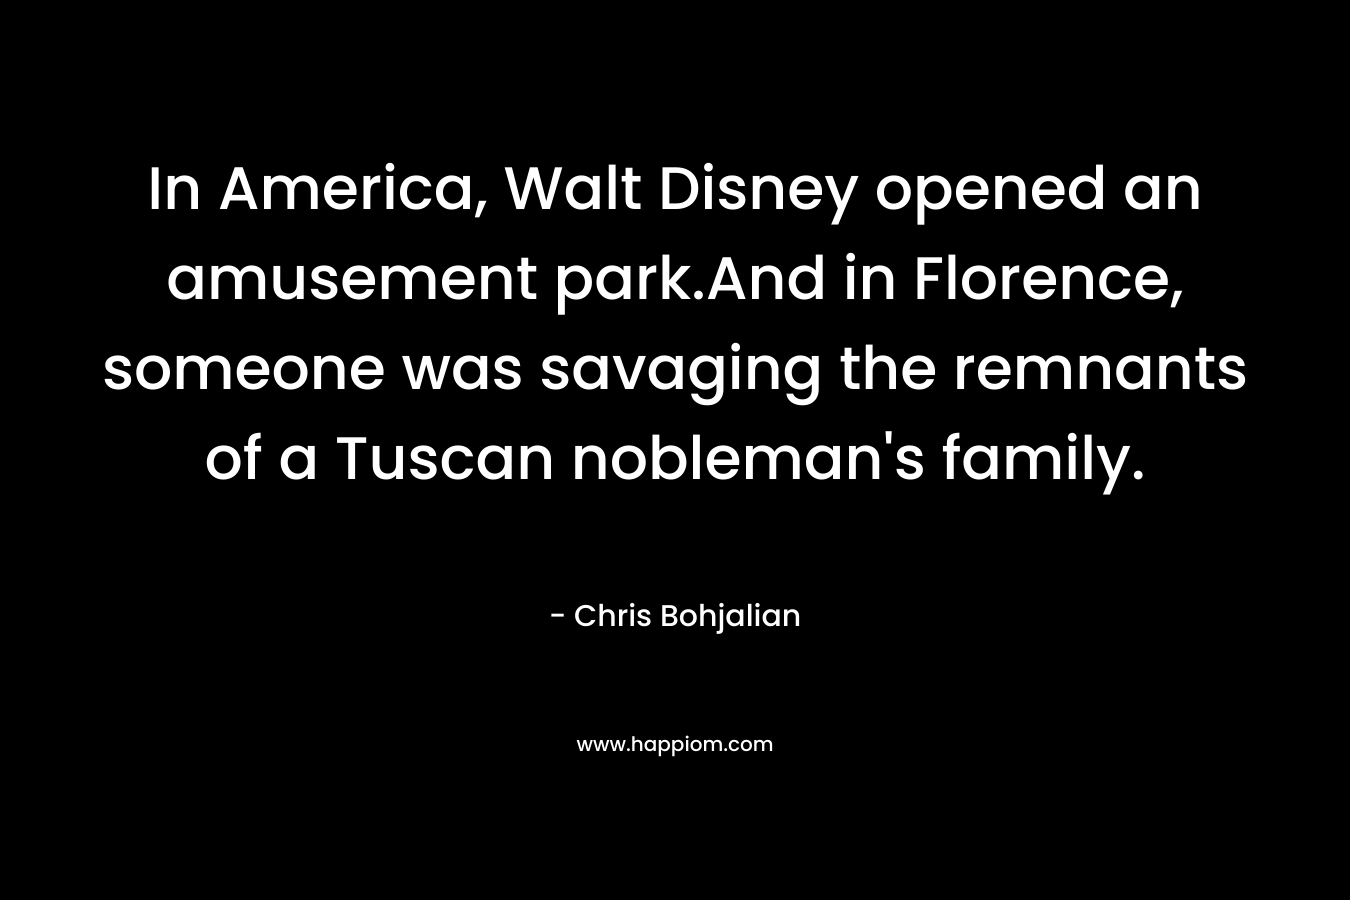 In America, Walt Disney opened an amusement park.And in Florence, someone was savaging the remnants of a Tuscan nobleman’s family. – Chris Bohjalian